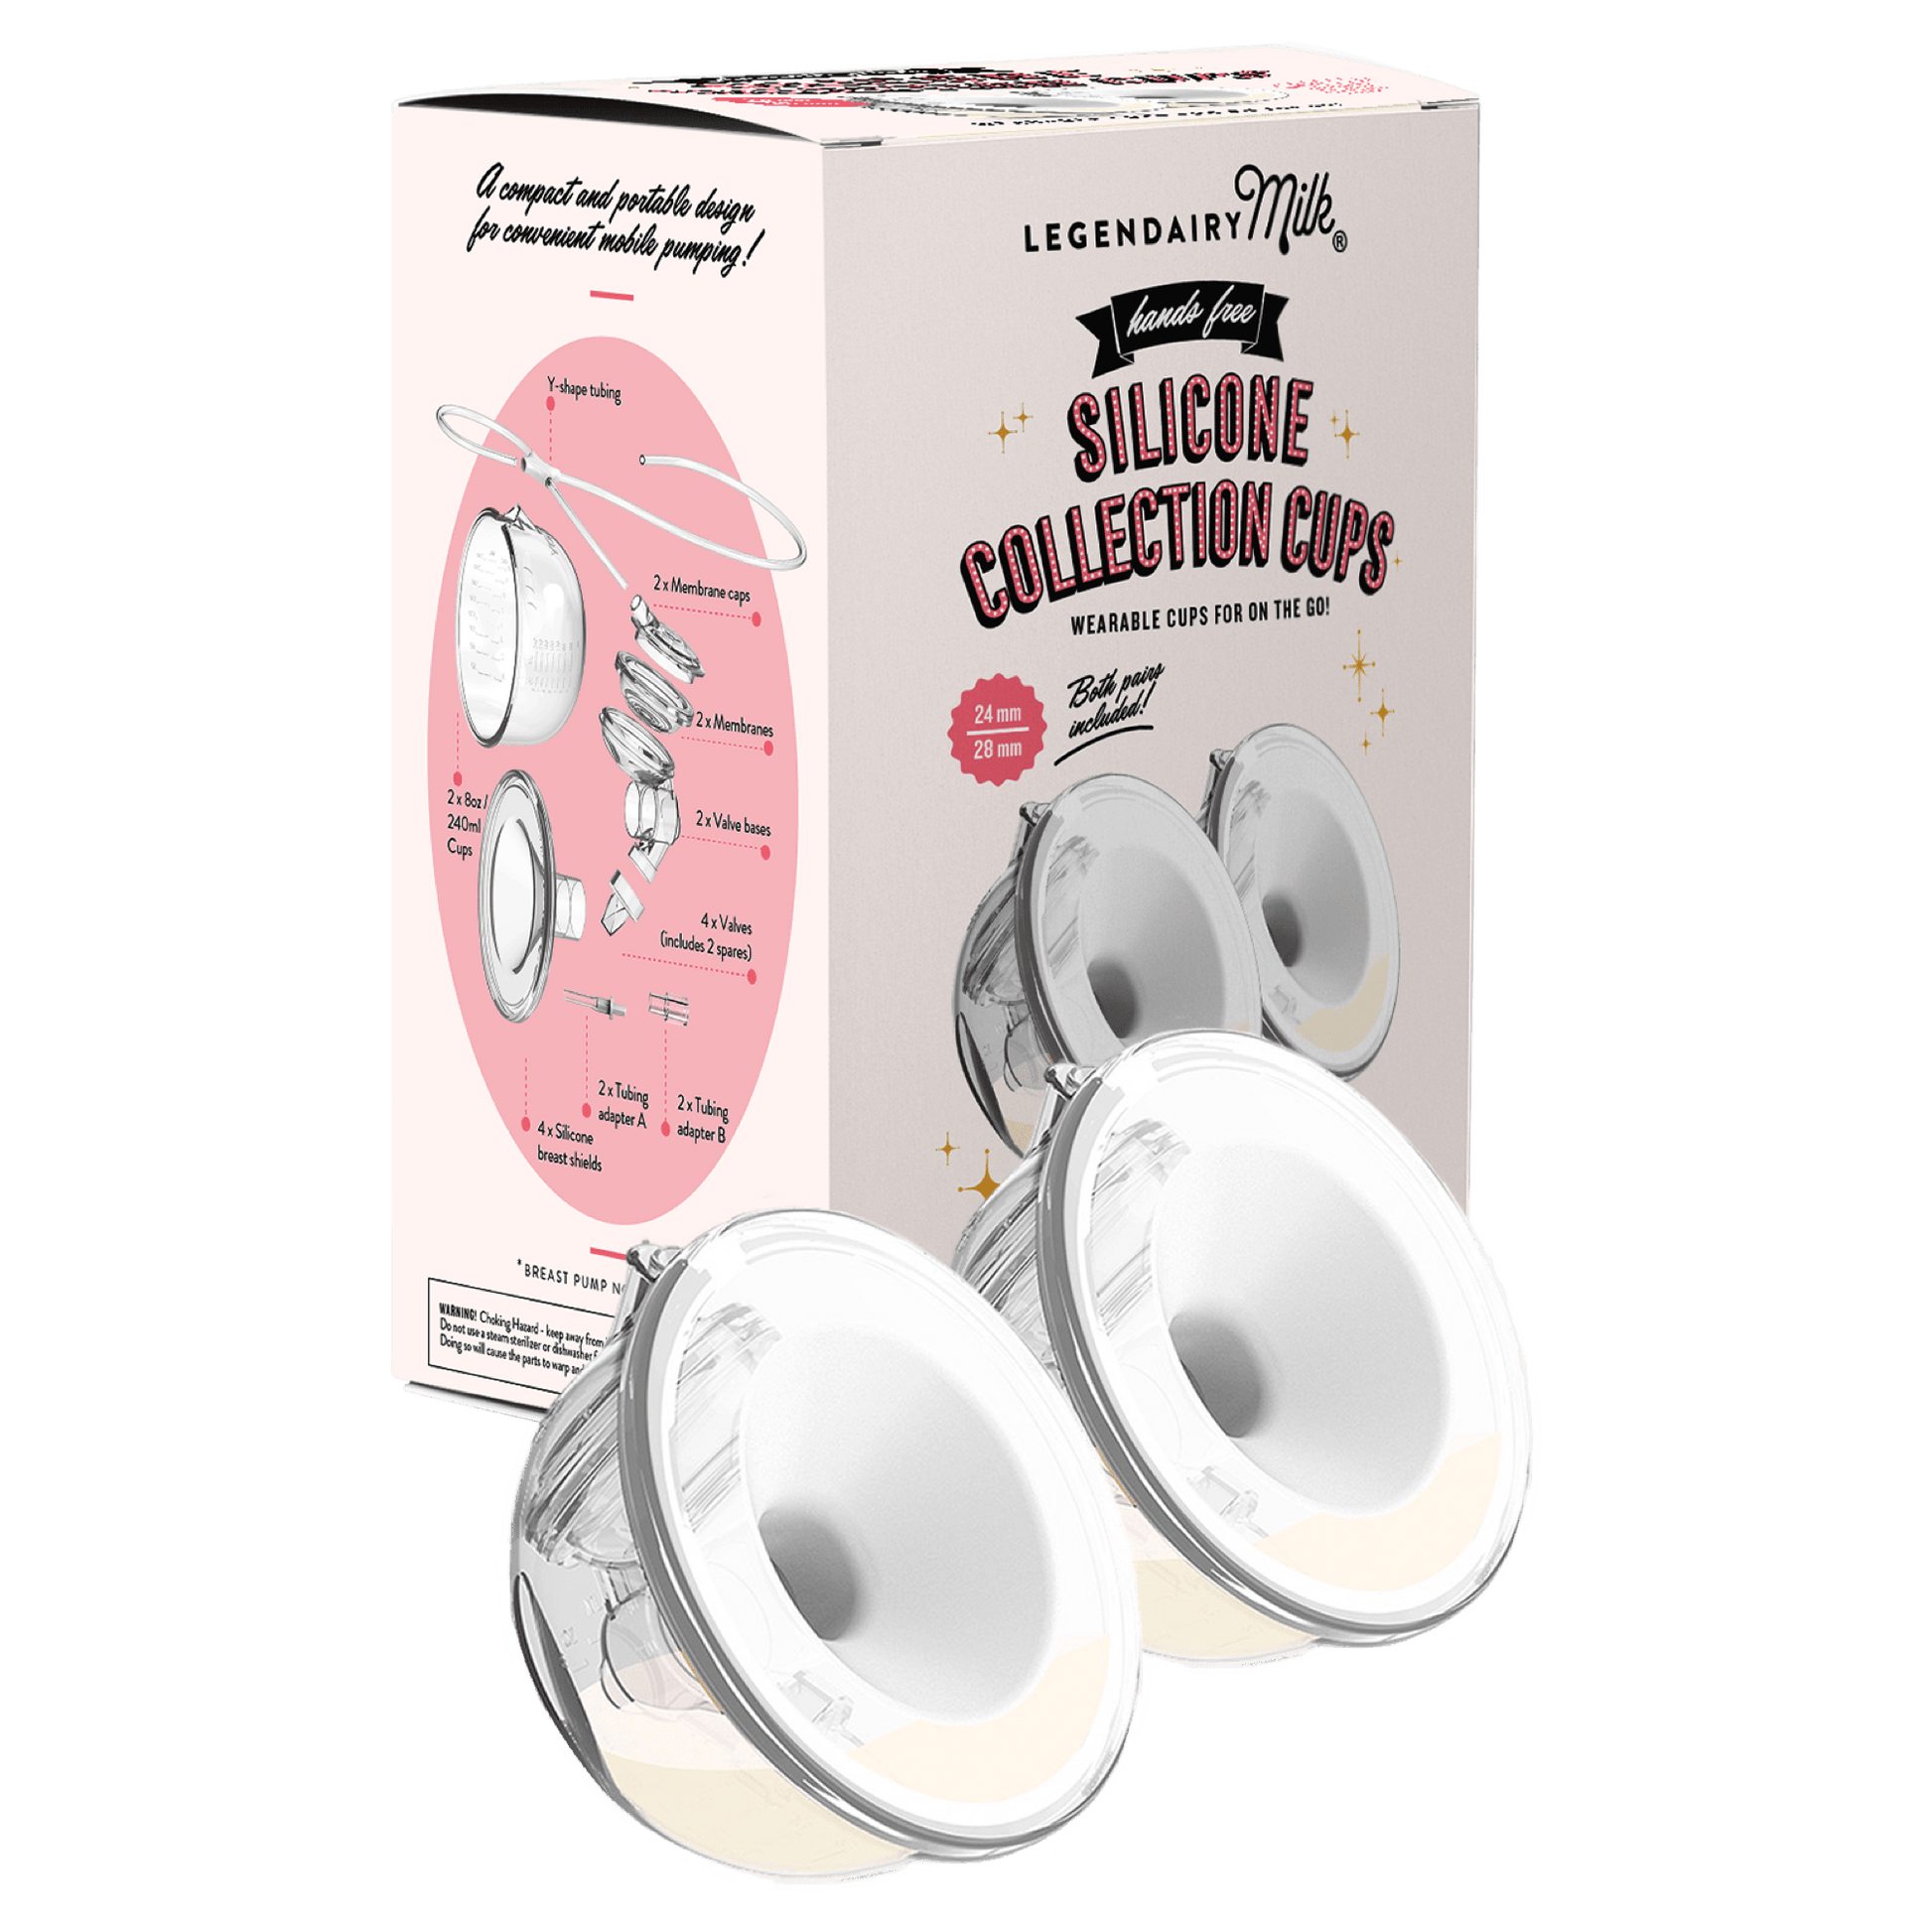 Wearable Milk Collector Silicone Hands-Free Breast Milk Collector